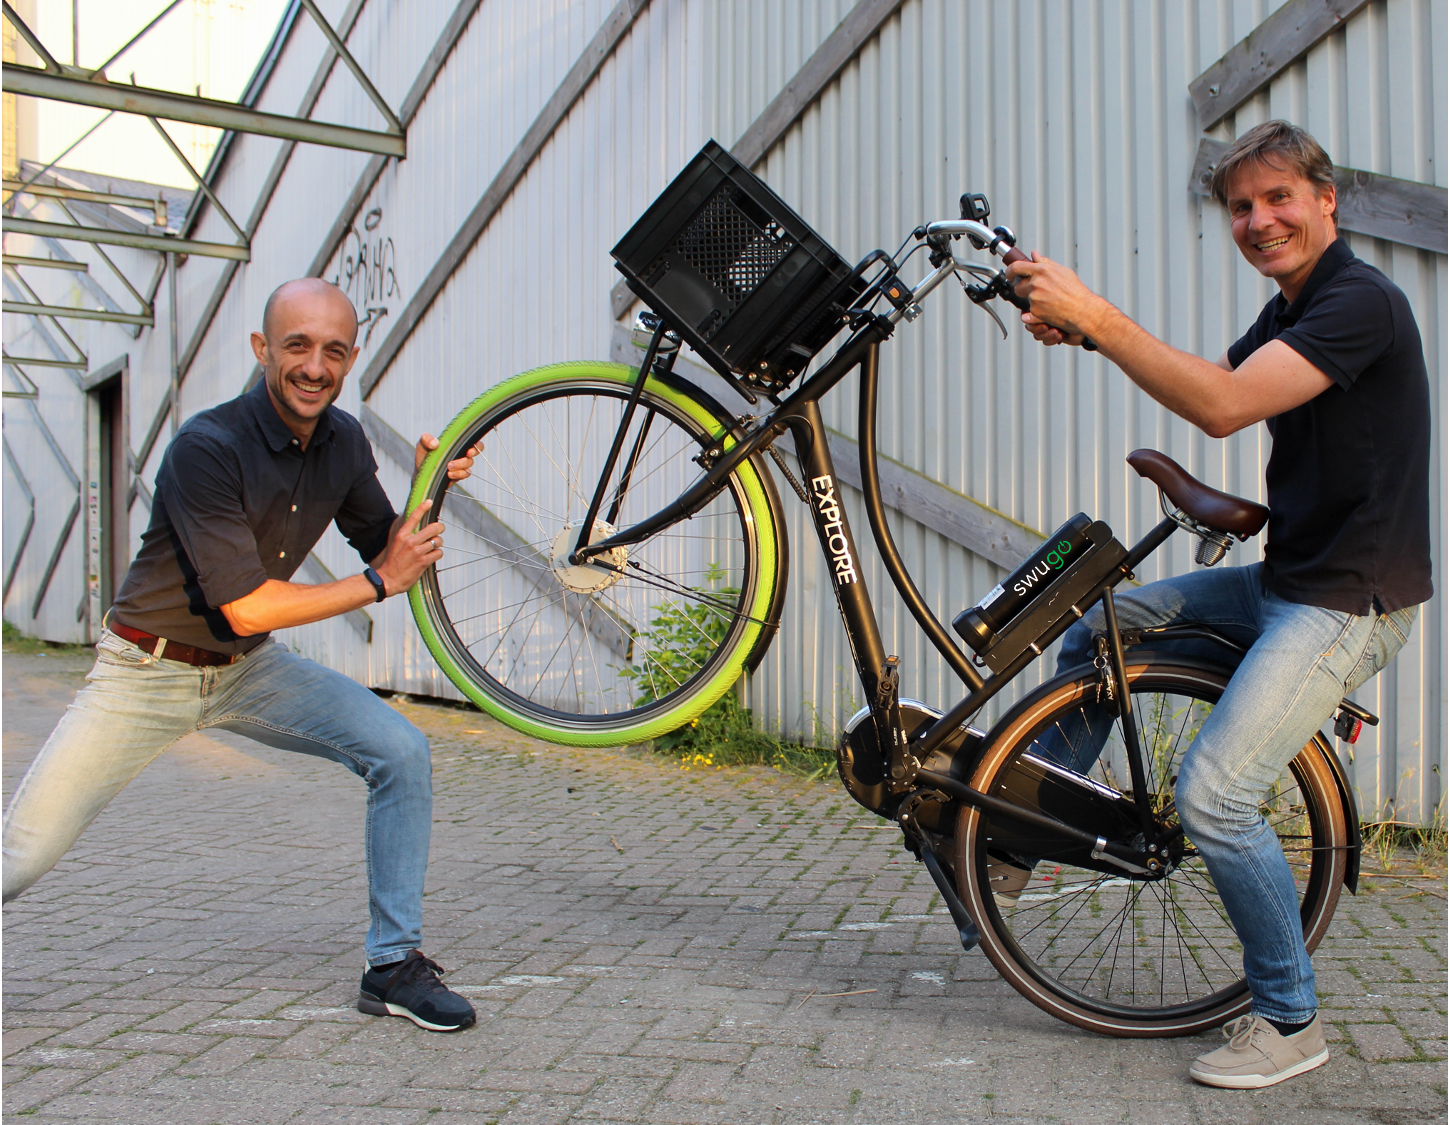 Turn your city bike into an electric bike with swugo's sustainable solution